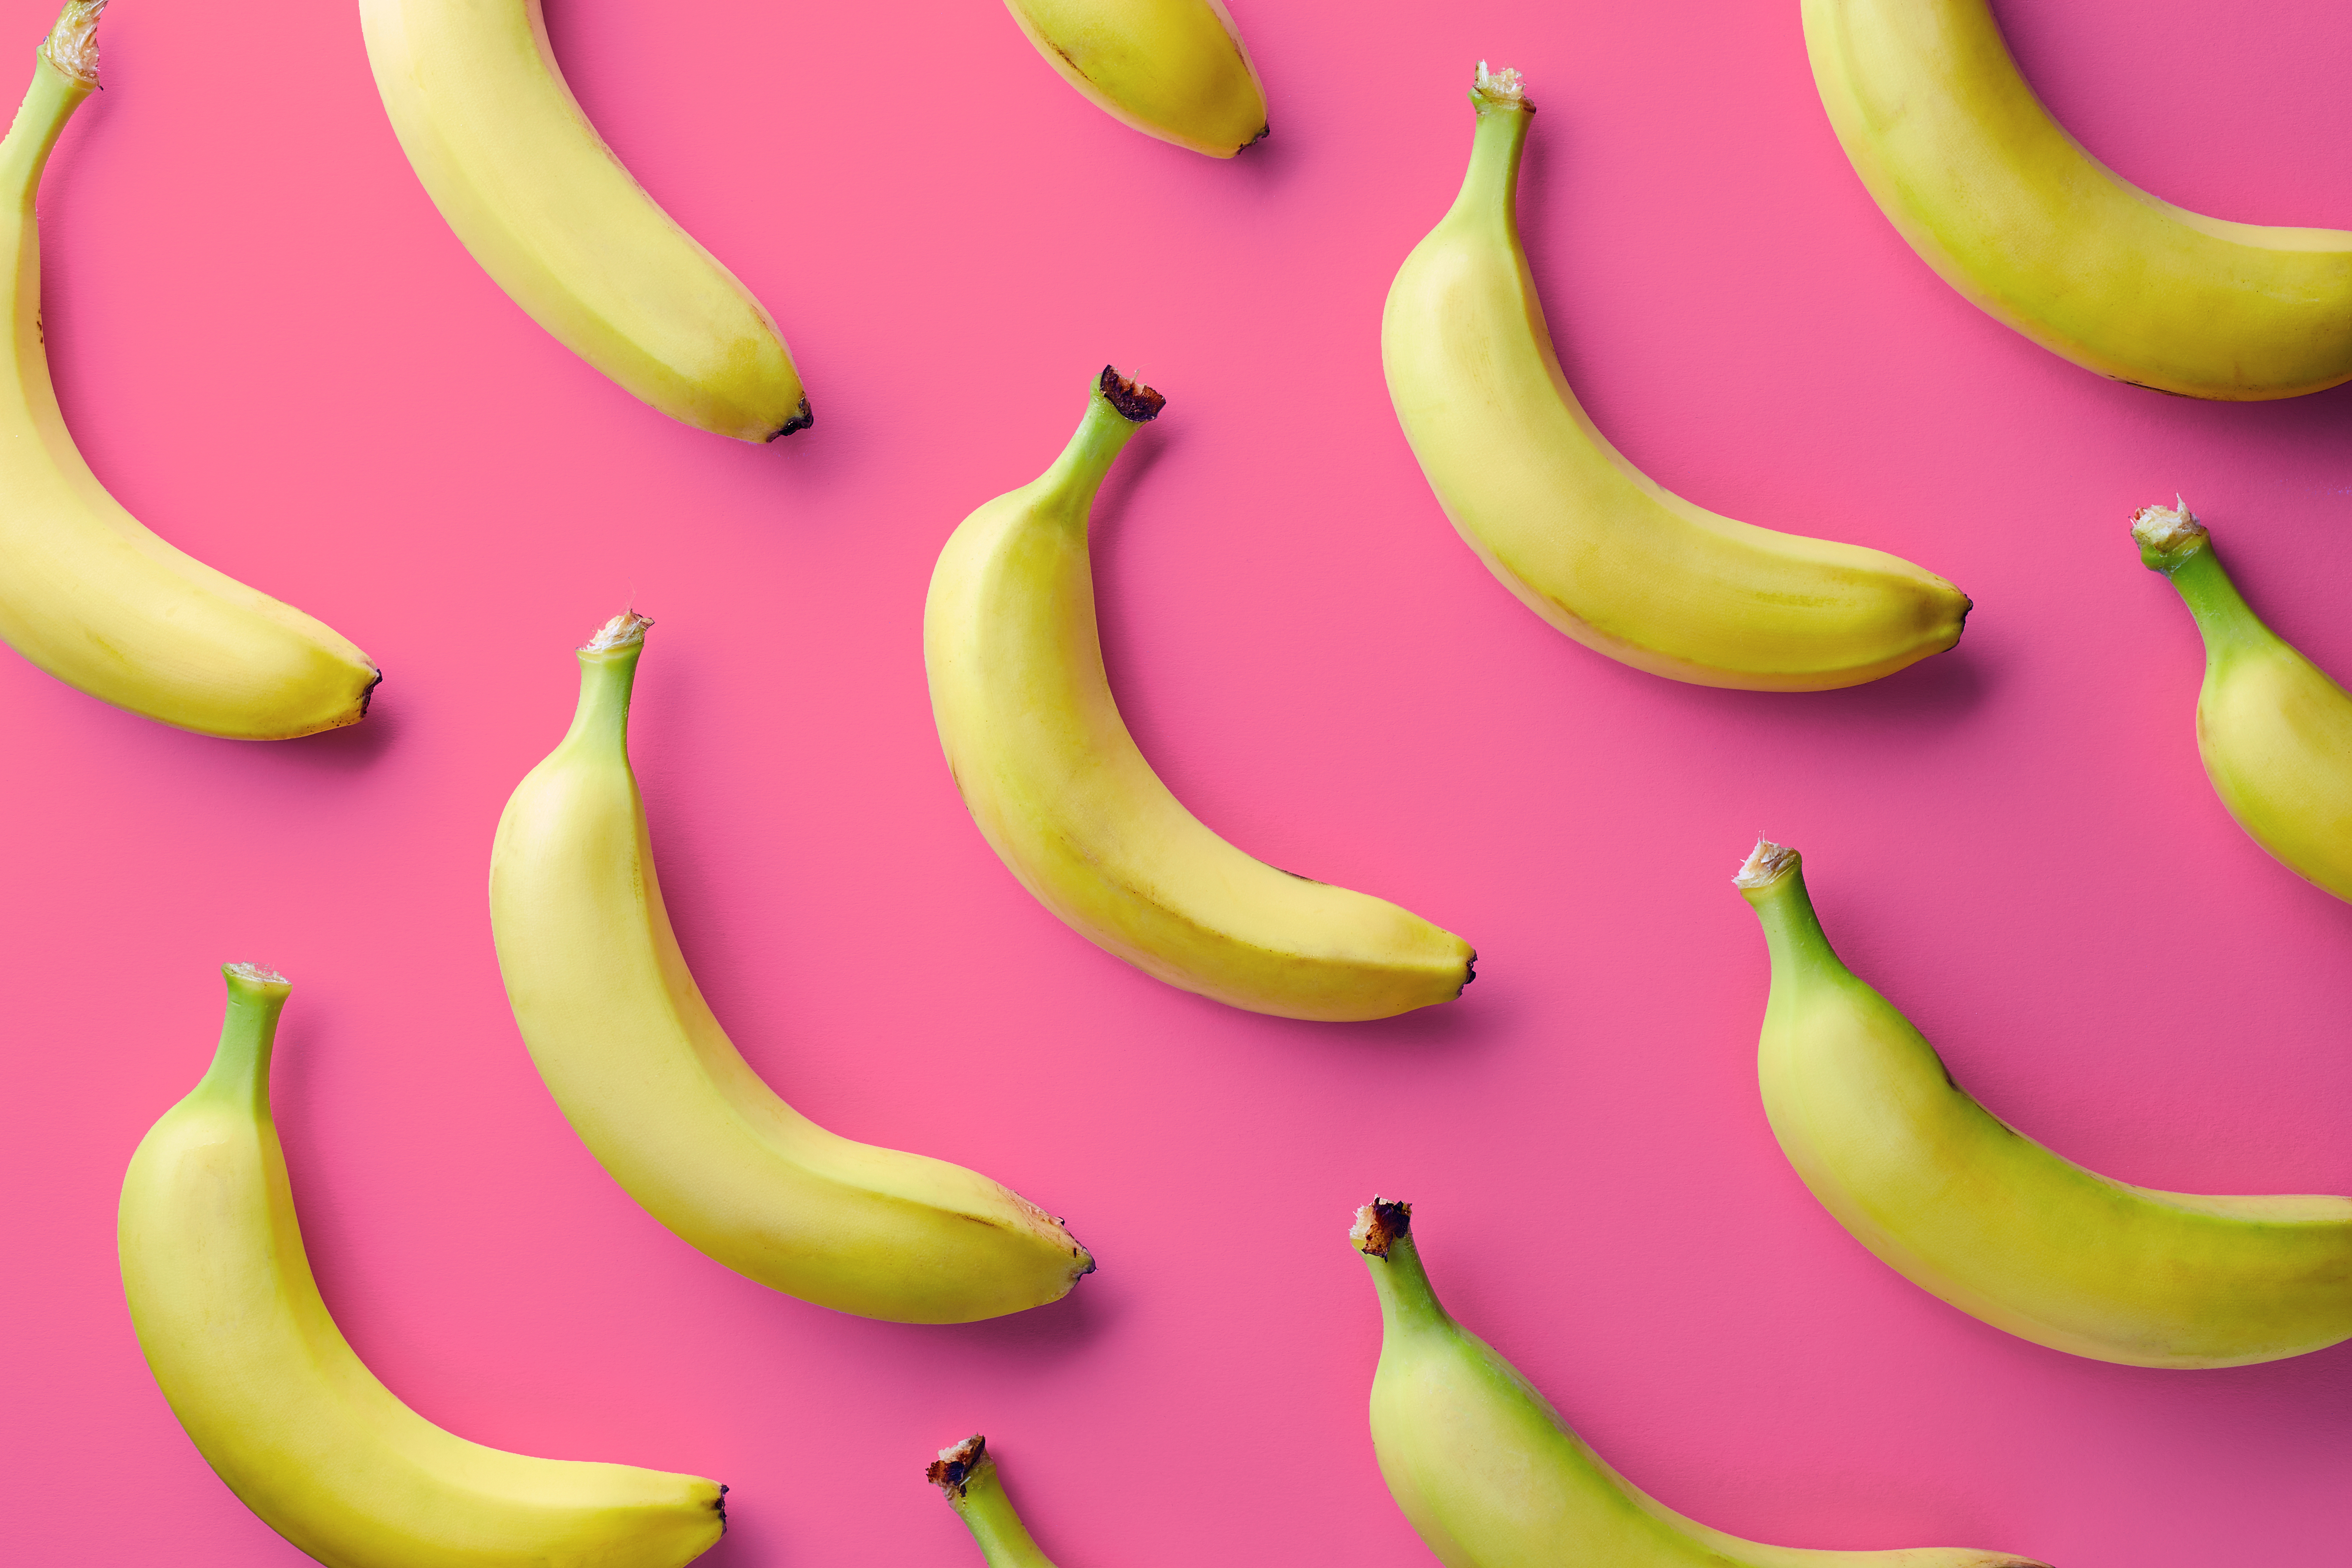 Bananas on a pink background